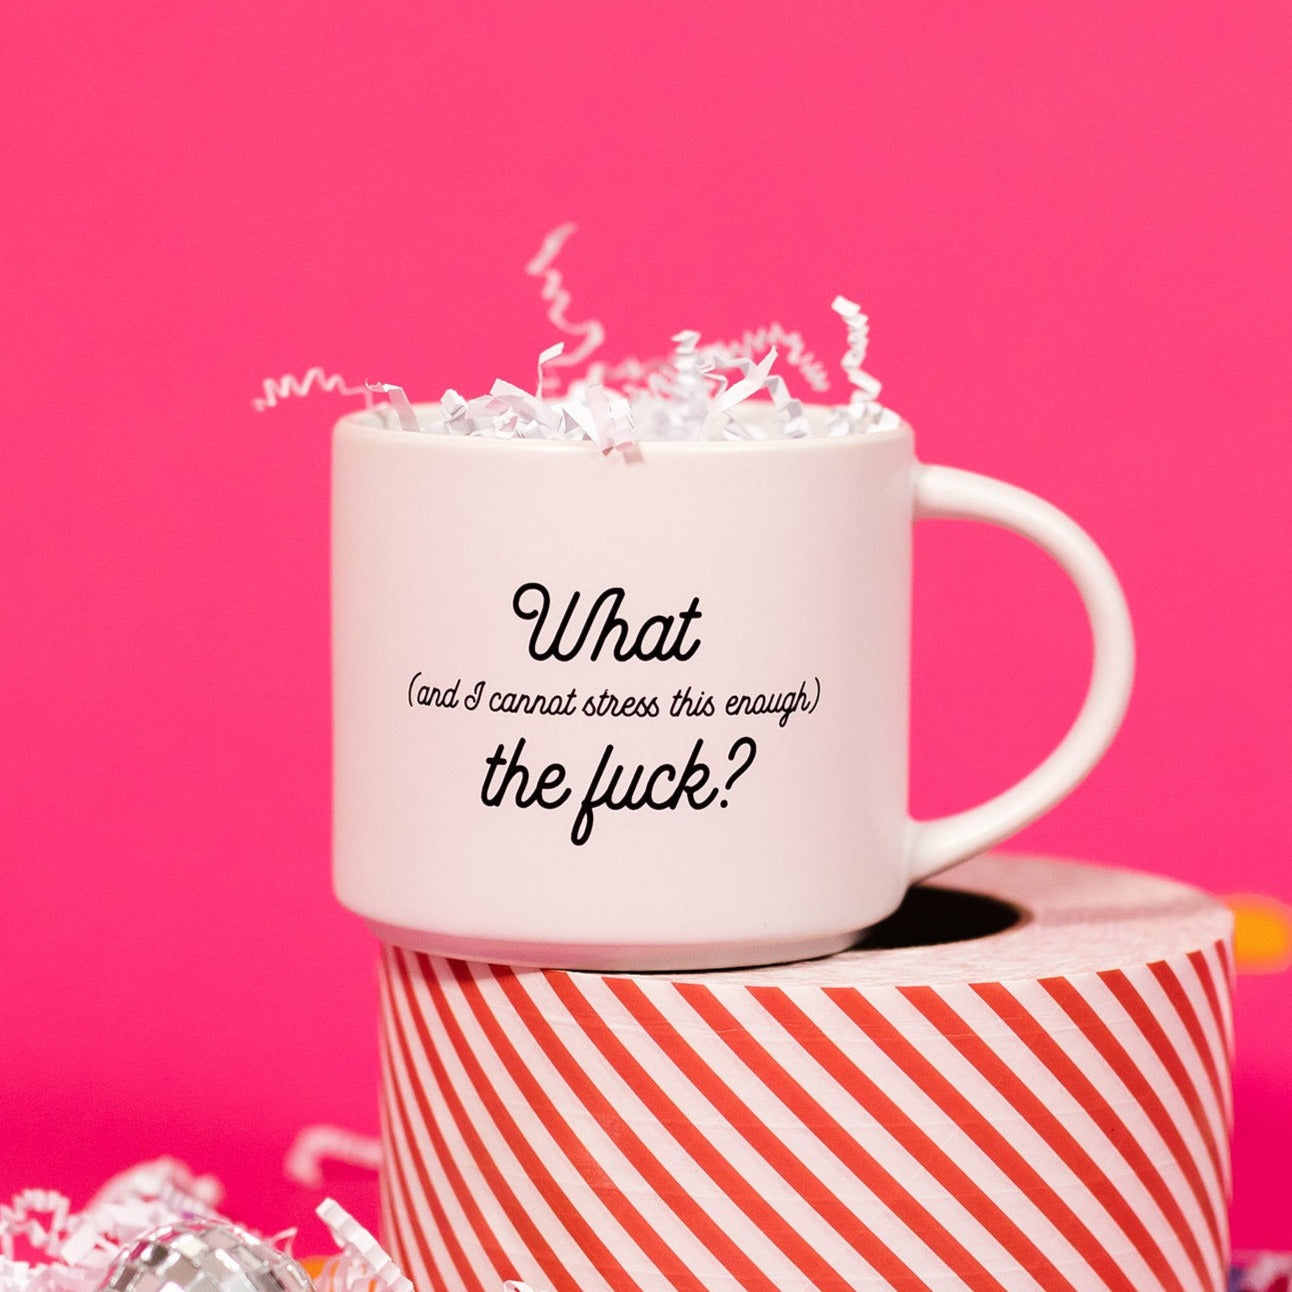 On a hot pink background sits a mug with white crinkle and big, colorful confetti scattered around. This white mug says "What (and I cannot stress this enough) the fuck?" in black script font. It has white crinkle in it and sits atop a red and white striped roll of tape. 